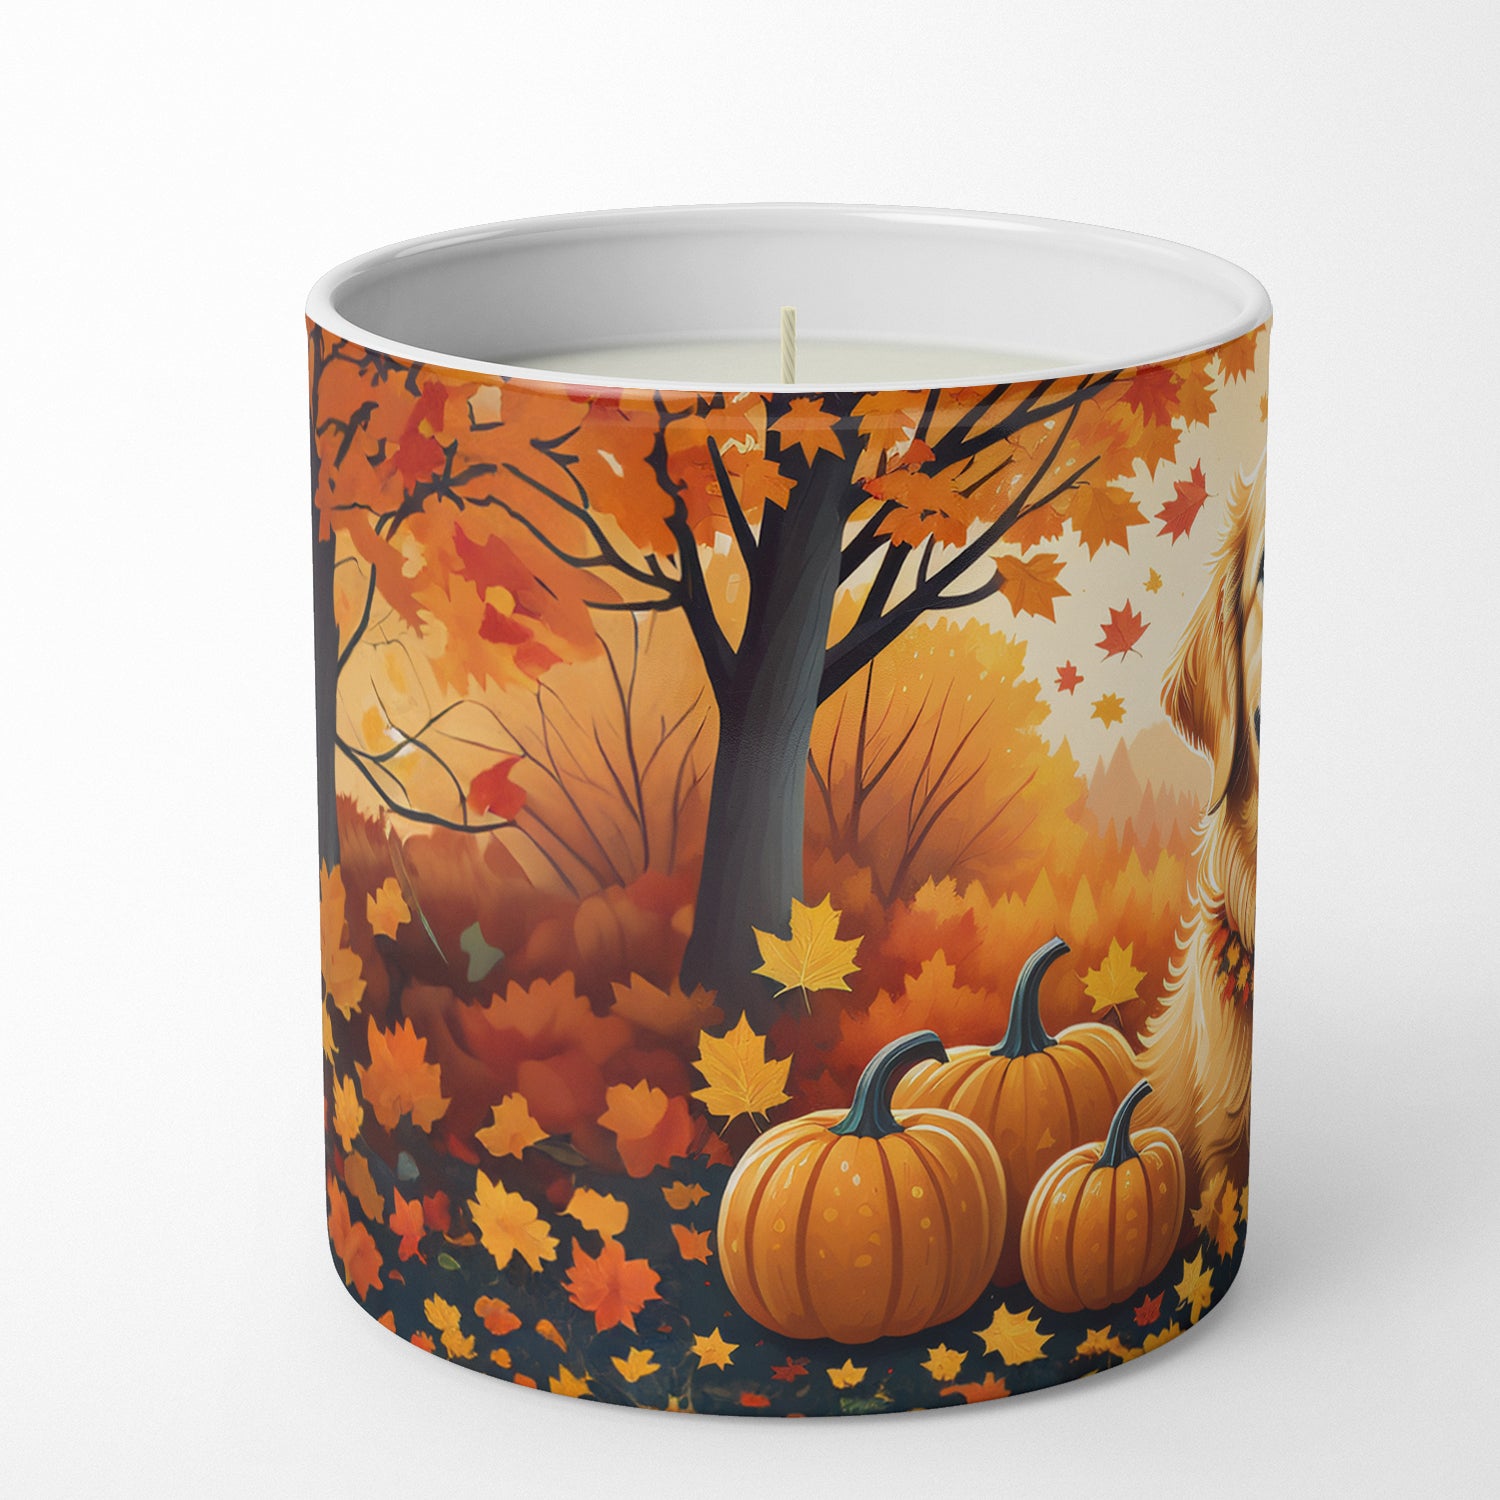 Golden Retriever Fall Decorative Soy Candle